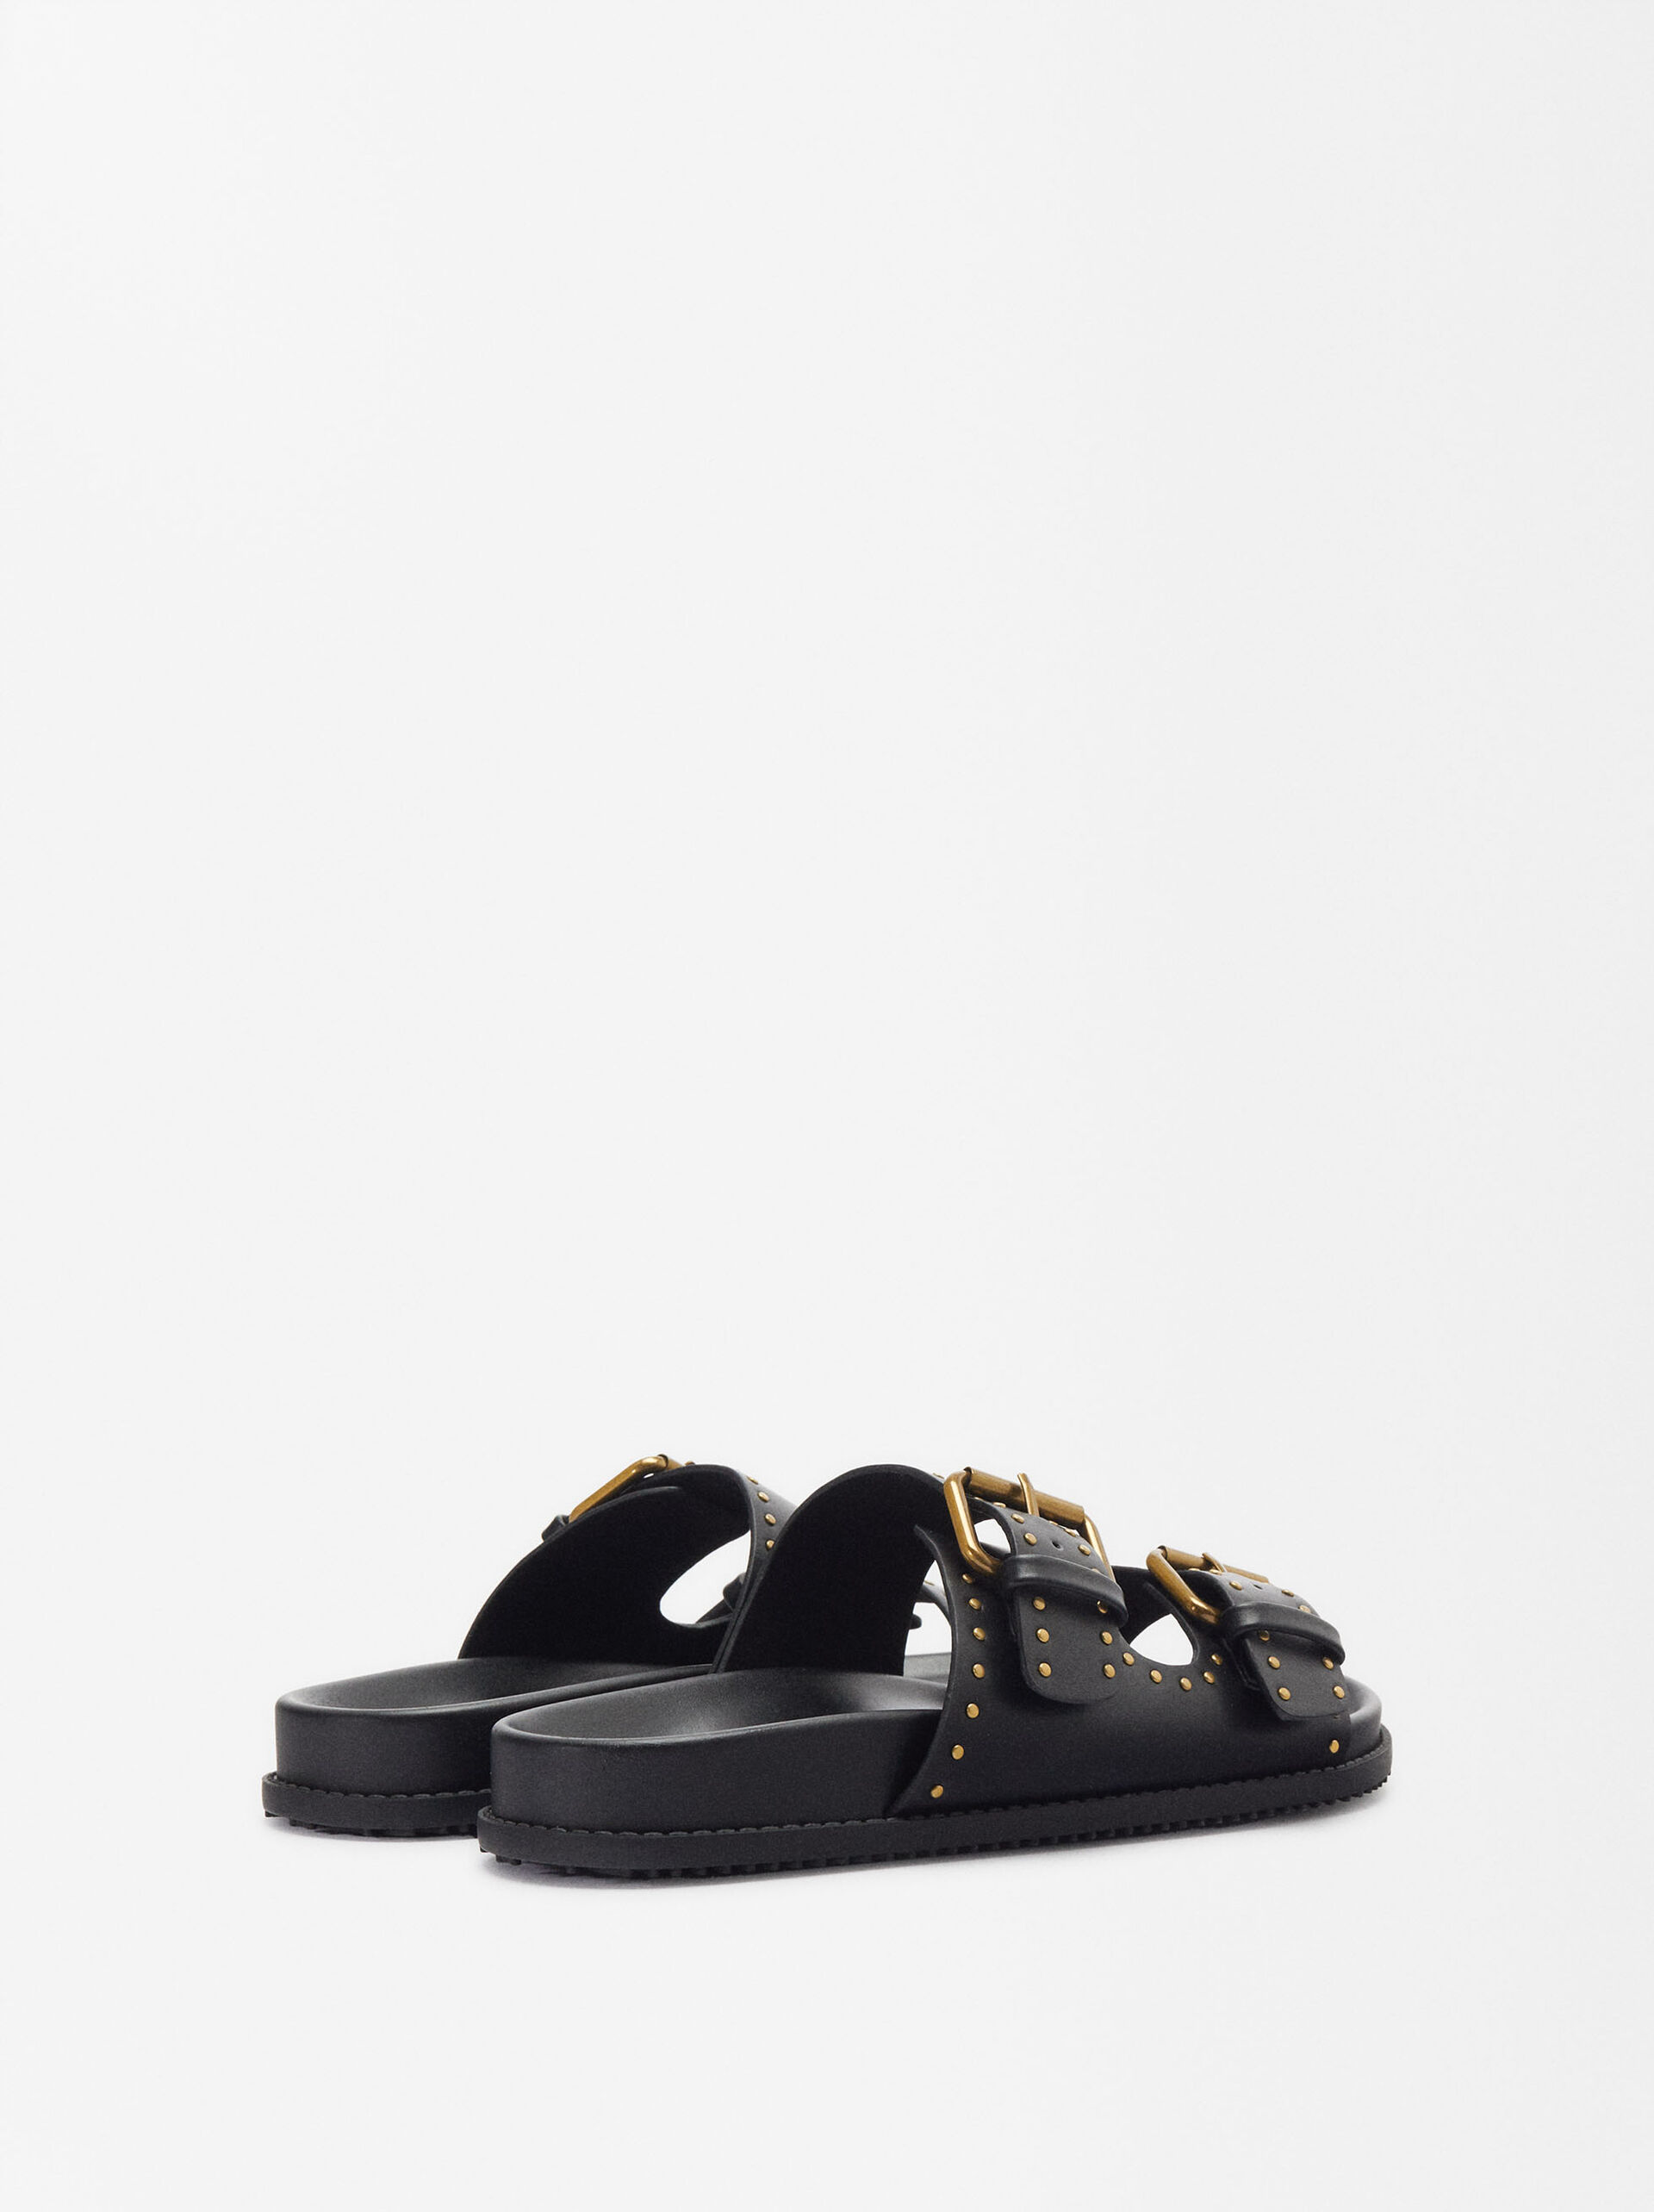 Flat Sandals With Buckles And Studs image number 4.0